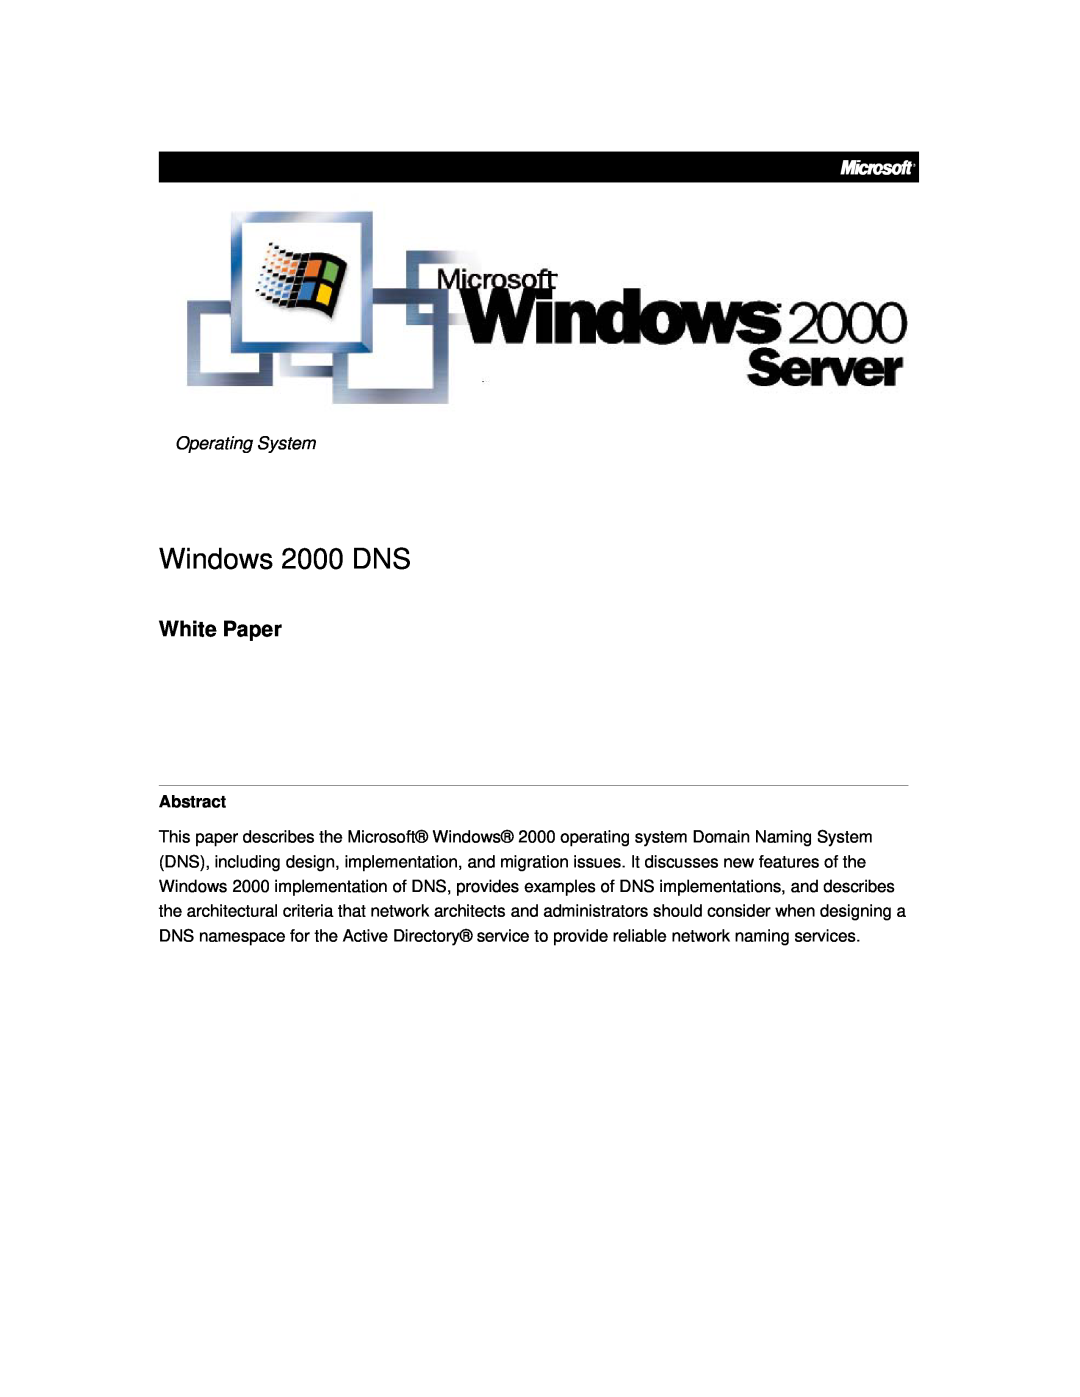 Microsoft windows 2000 DNS manual Operating System, Abstract, Windows 2000 DNS, White Paper 